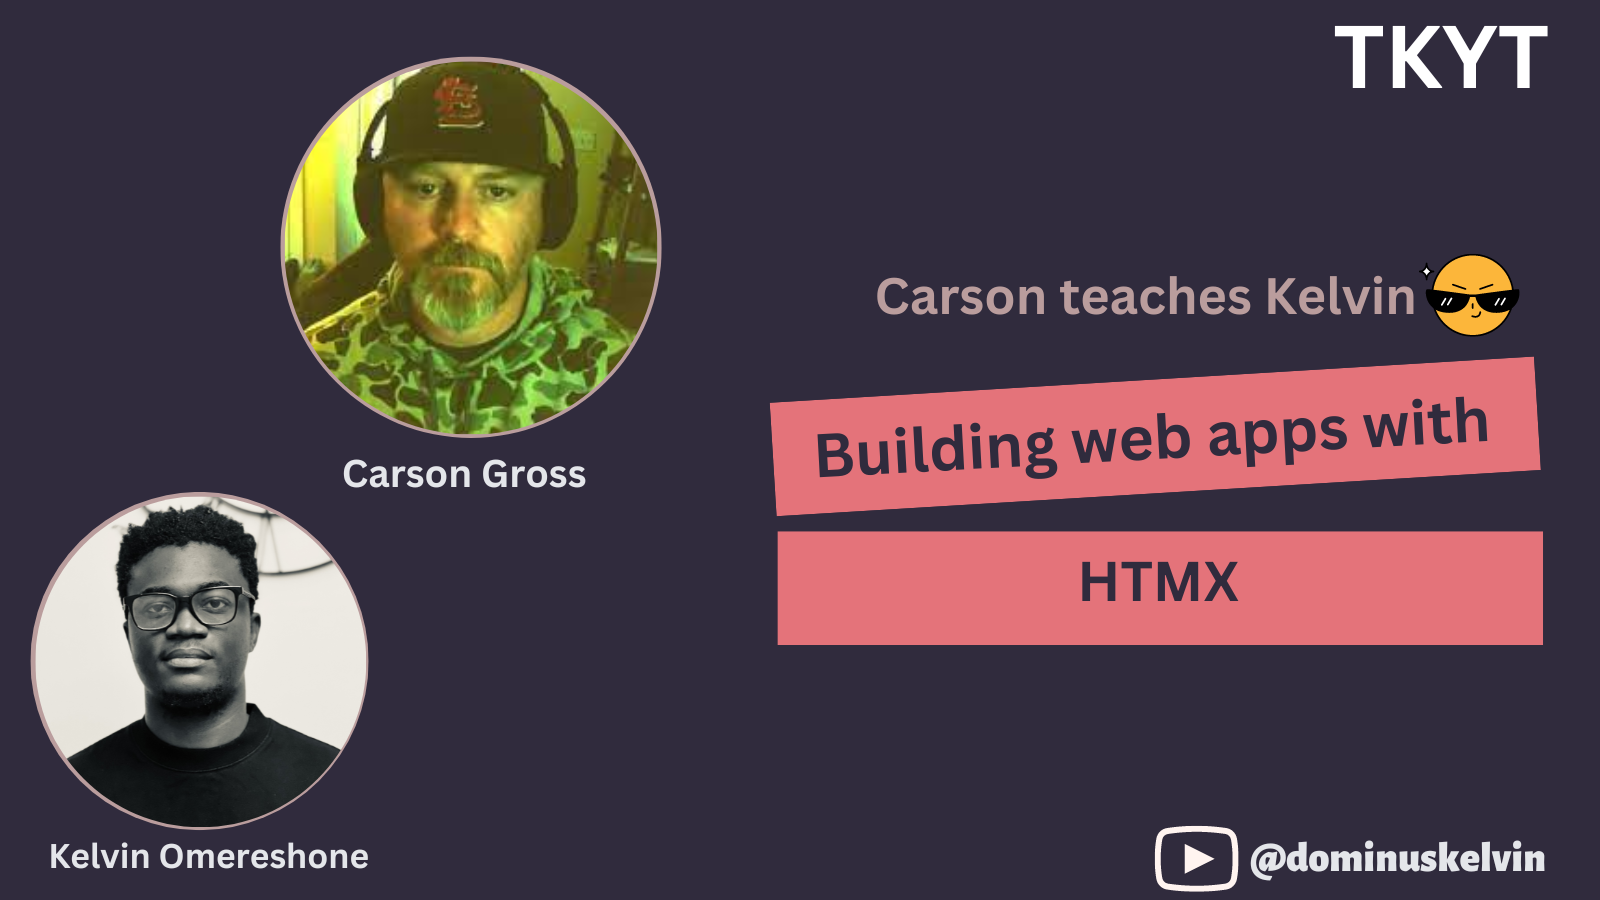 Building web apps with HTMX